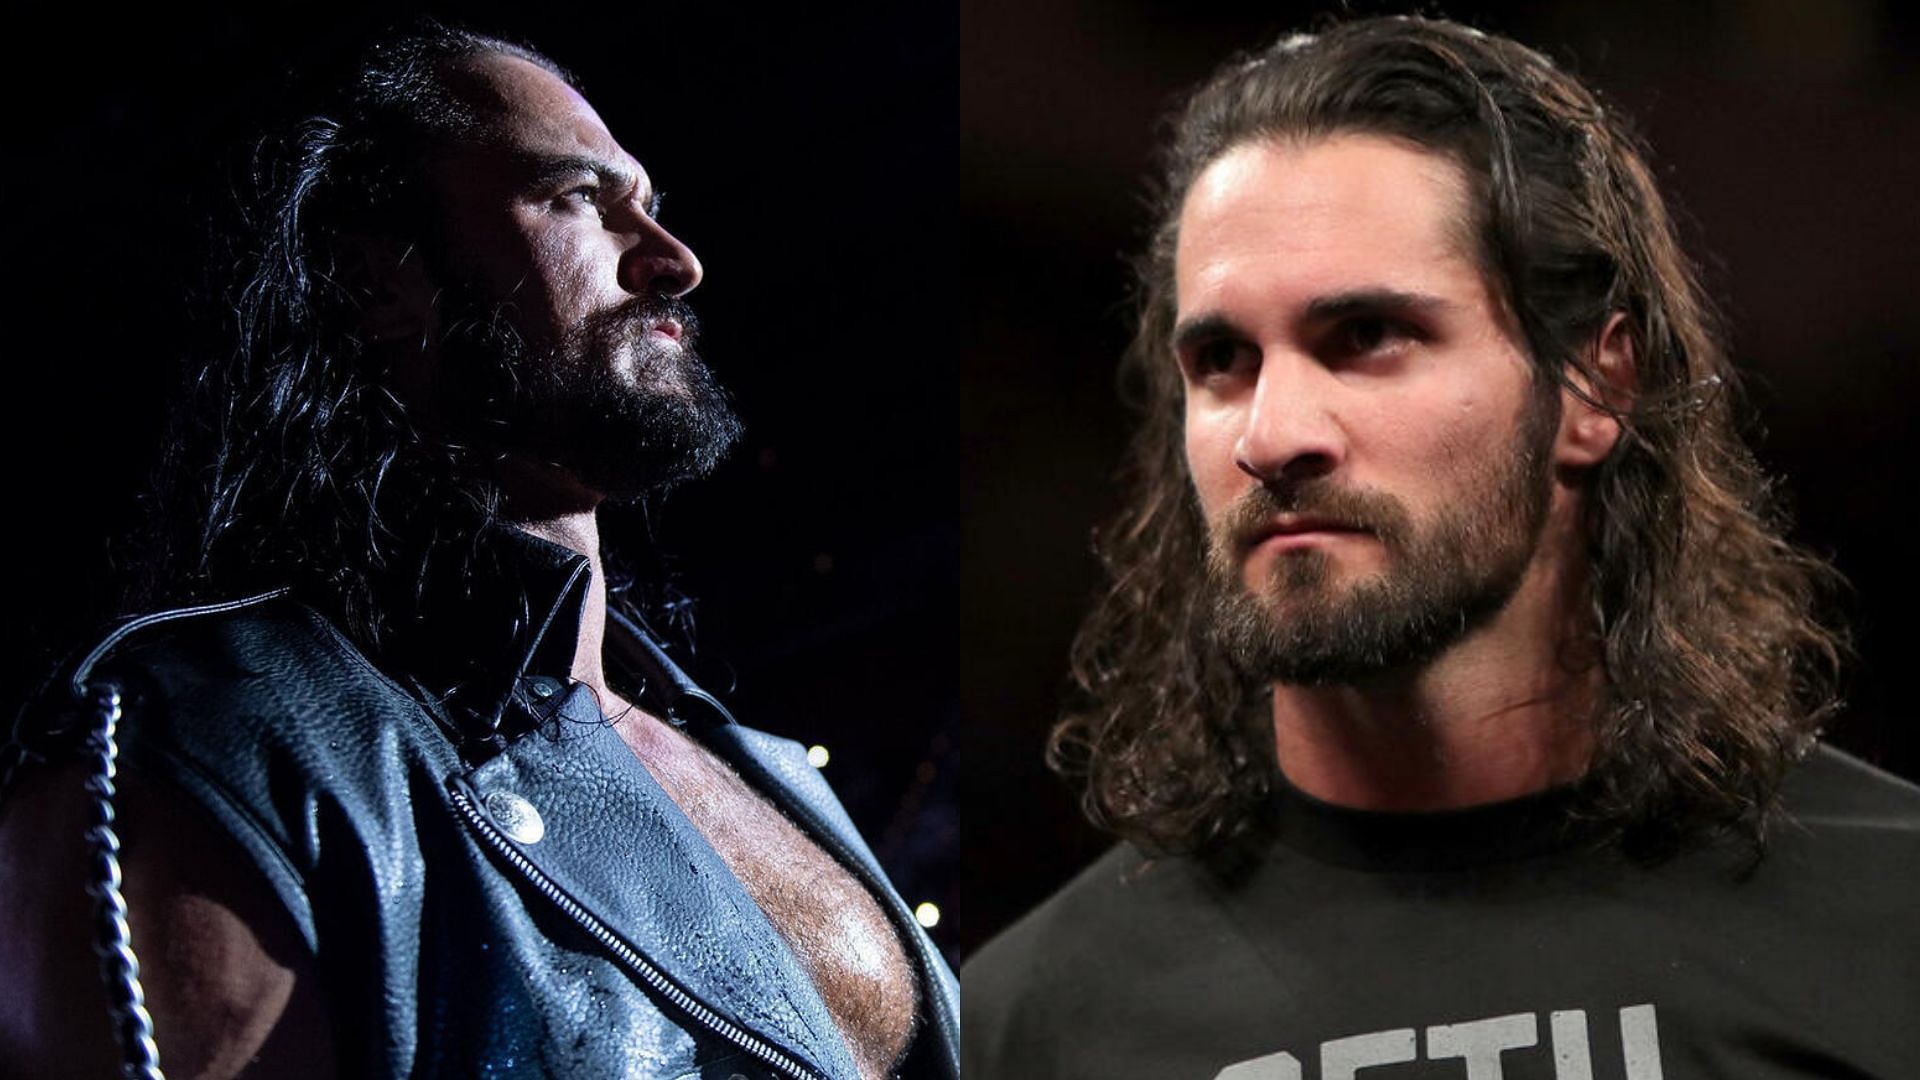 McIntyre and Rollins will compete at WrestleMania.